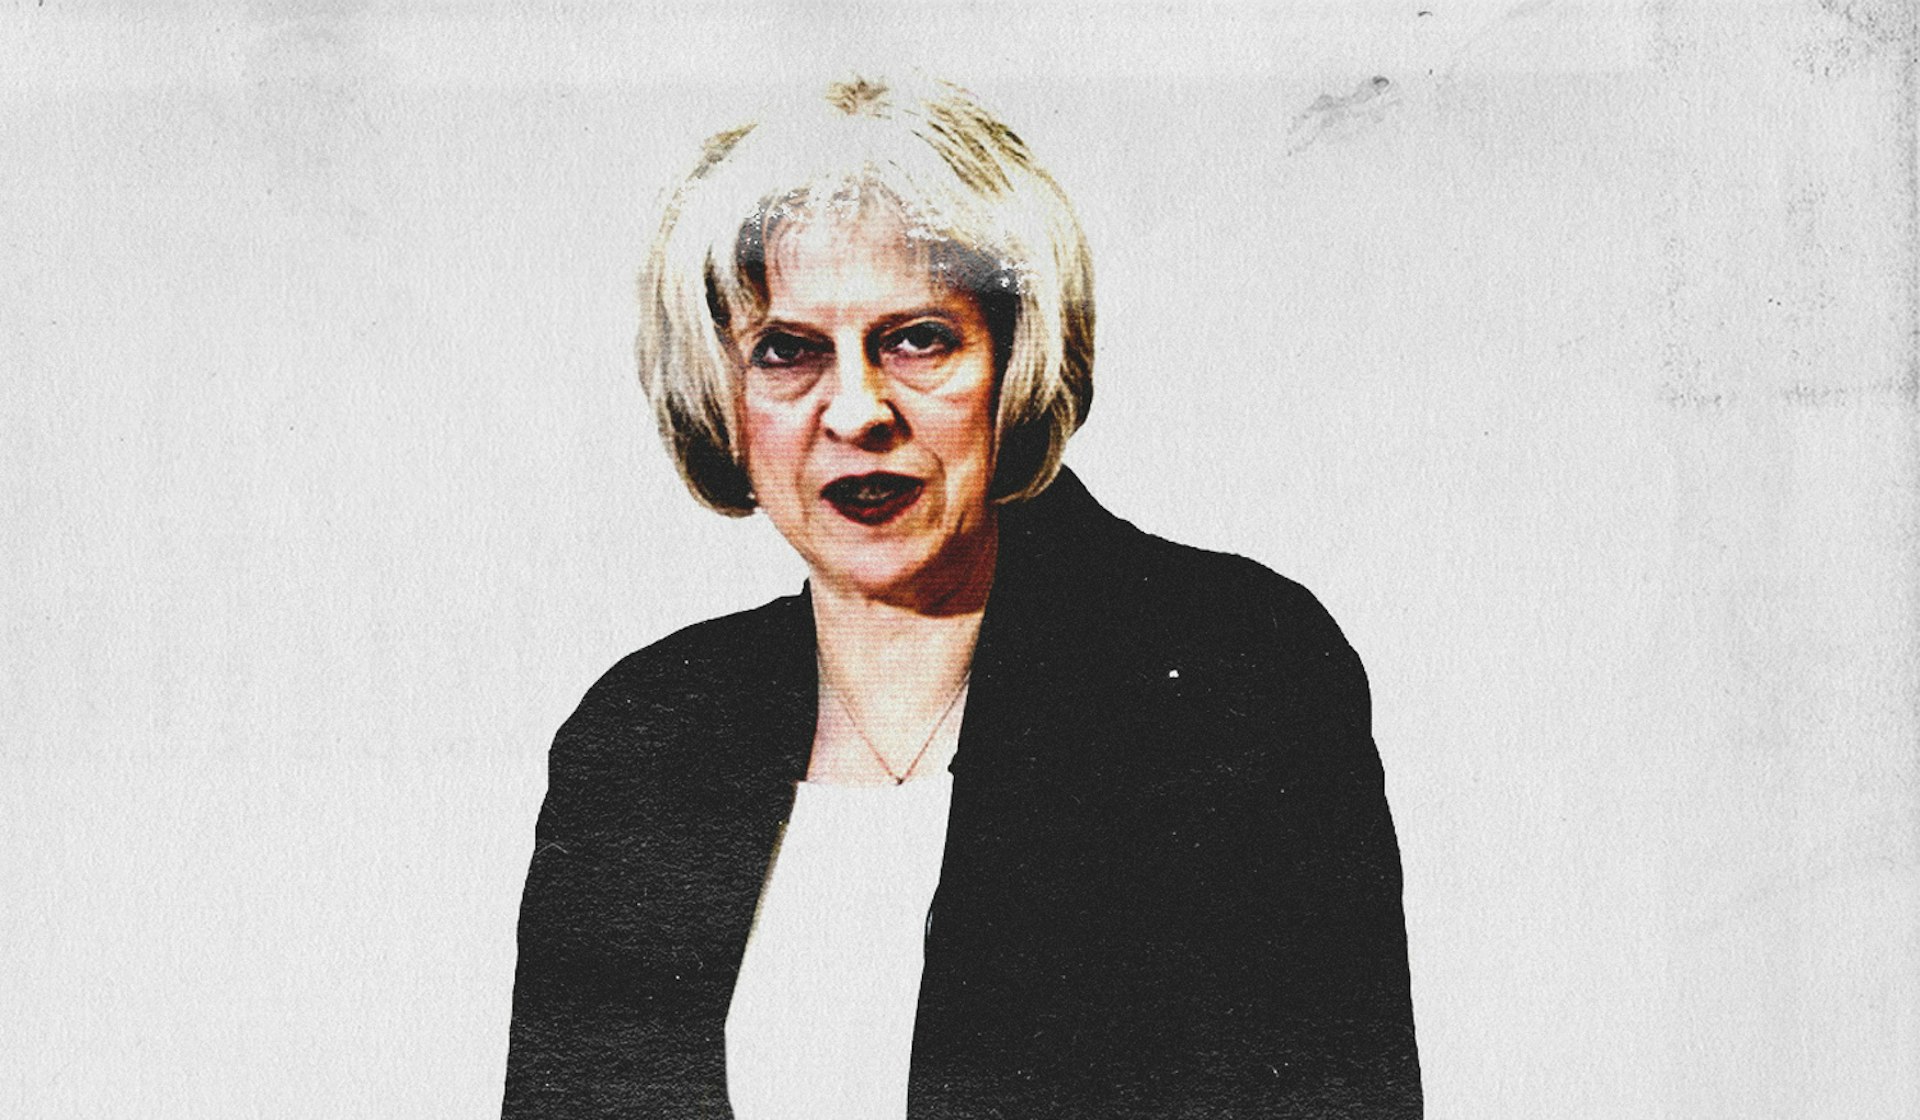 This general election marks the death of toxic Tory 'common sense'